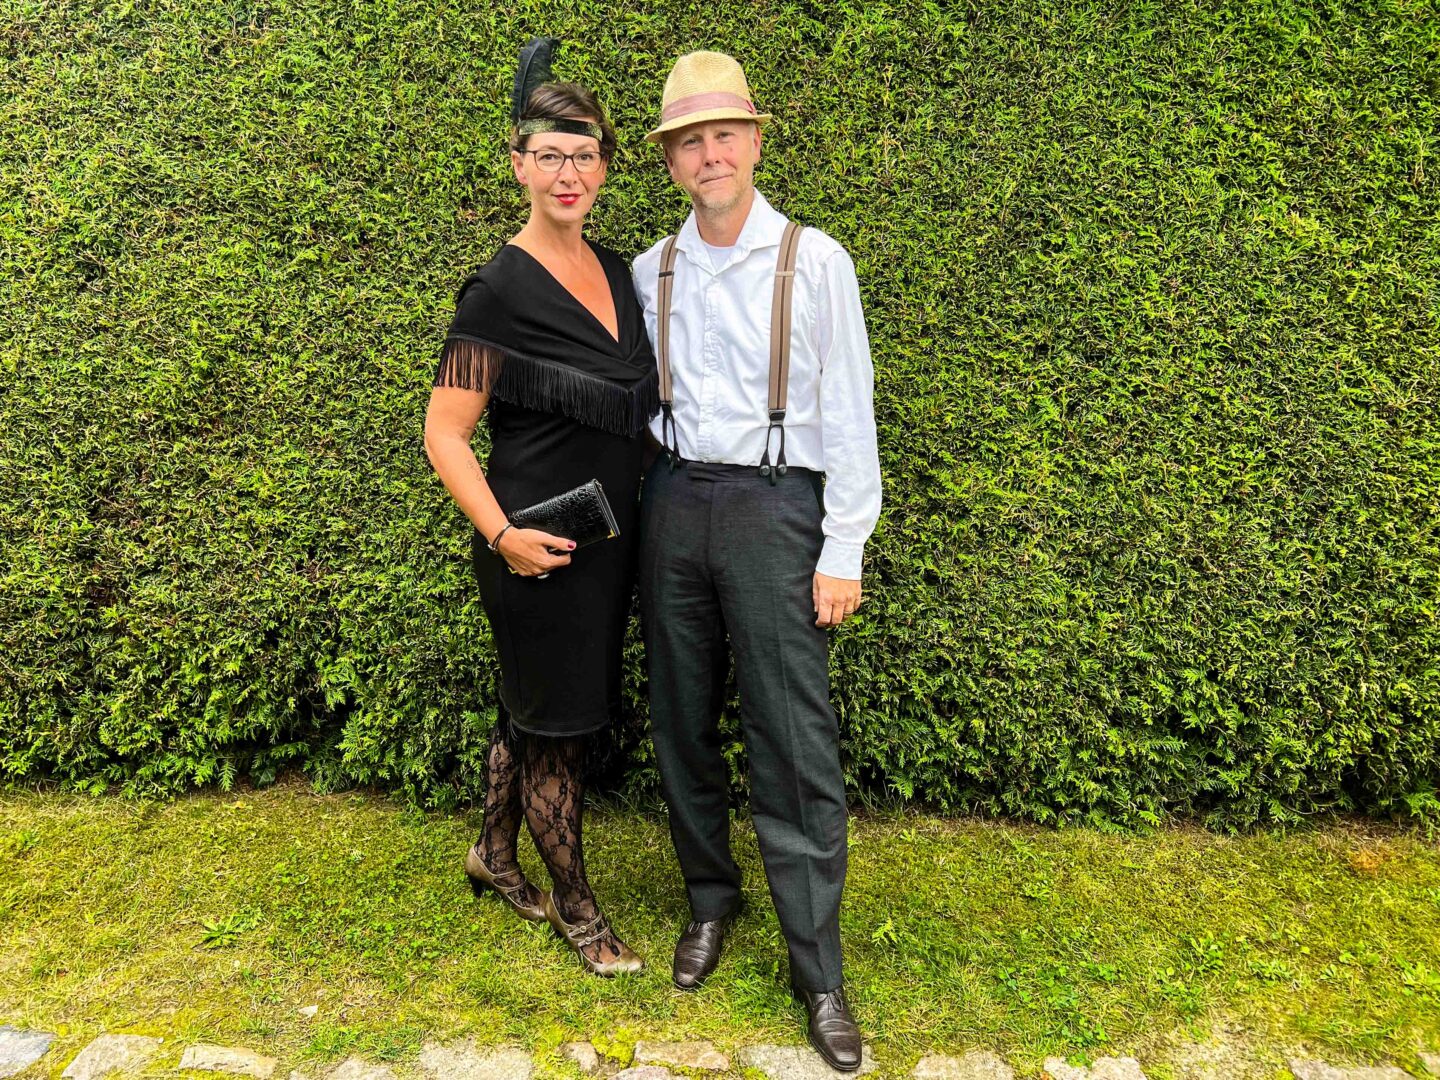 Germany - 20s party, lots of family and off to Central Europe